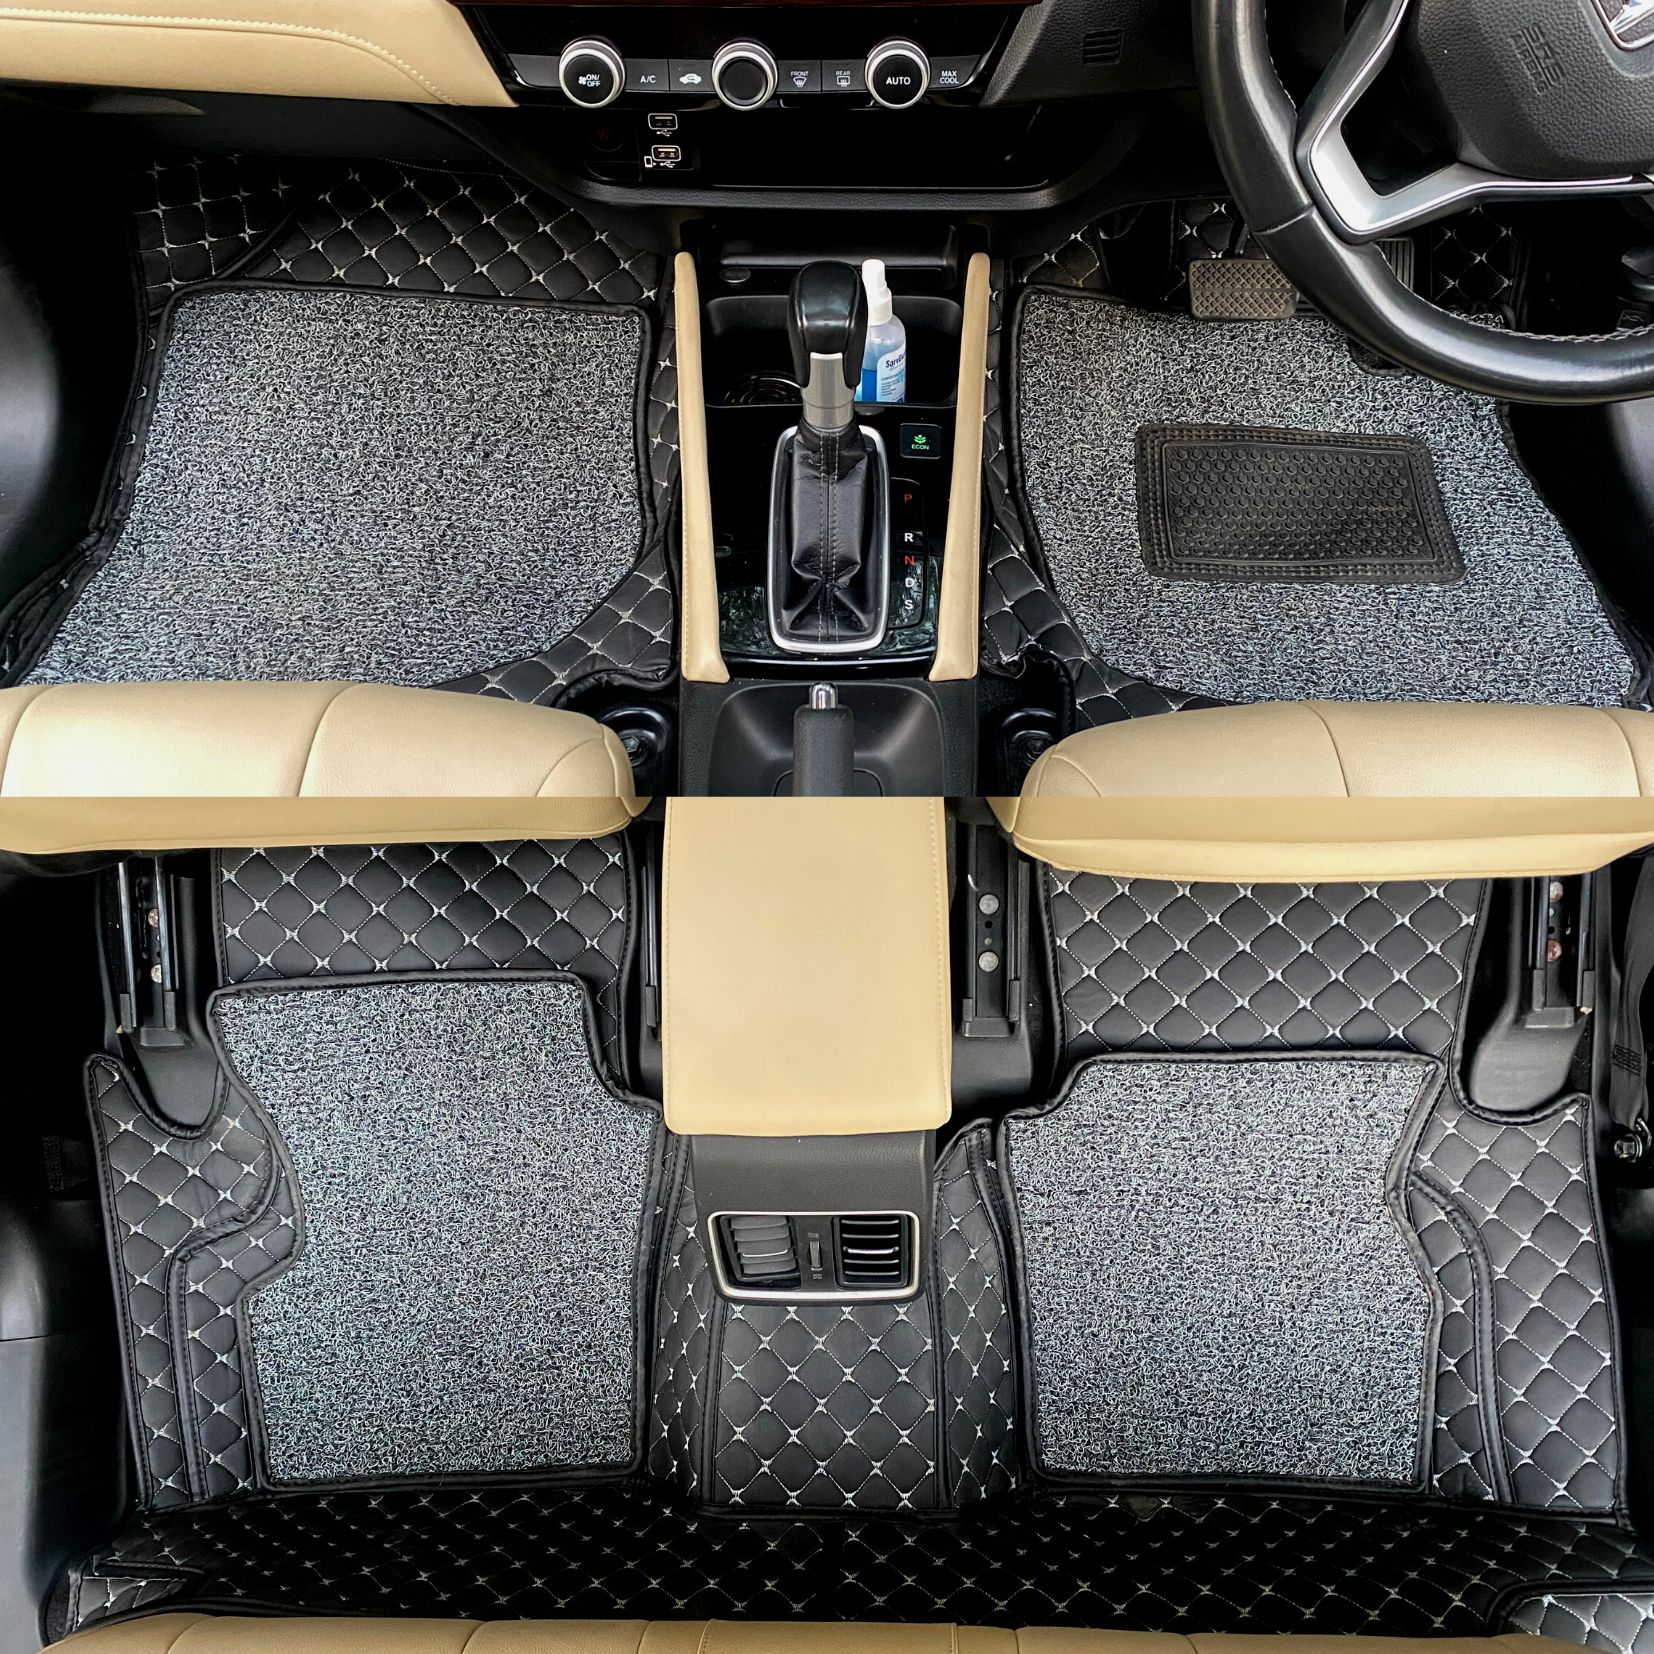 Mecarnic Luxury 7D Car Floor Mat for Honda CRV 7 Seater, 7 Layer Protection  with Grass mat, Car Accessories, Luxury Leather